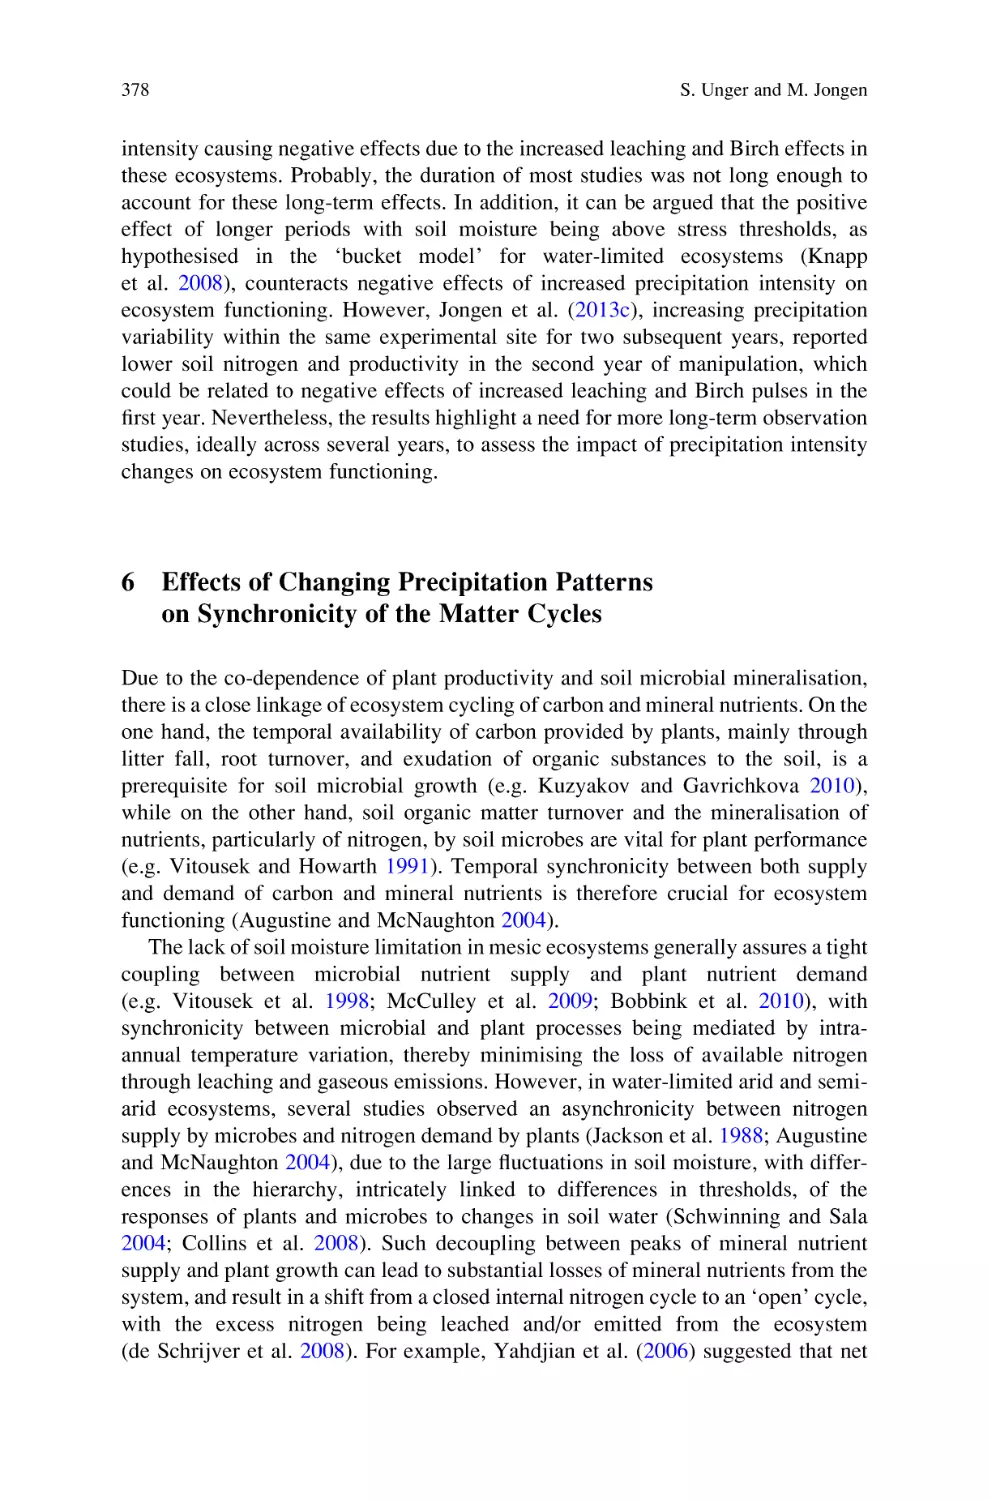 6 Effects of Changing Precipitation Patterns on Synchronicity of the Matter Cycles